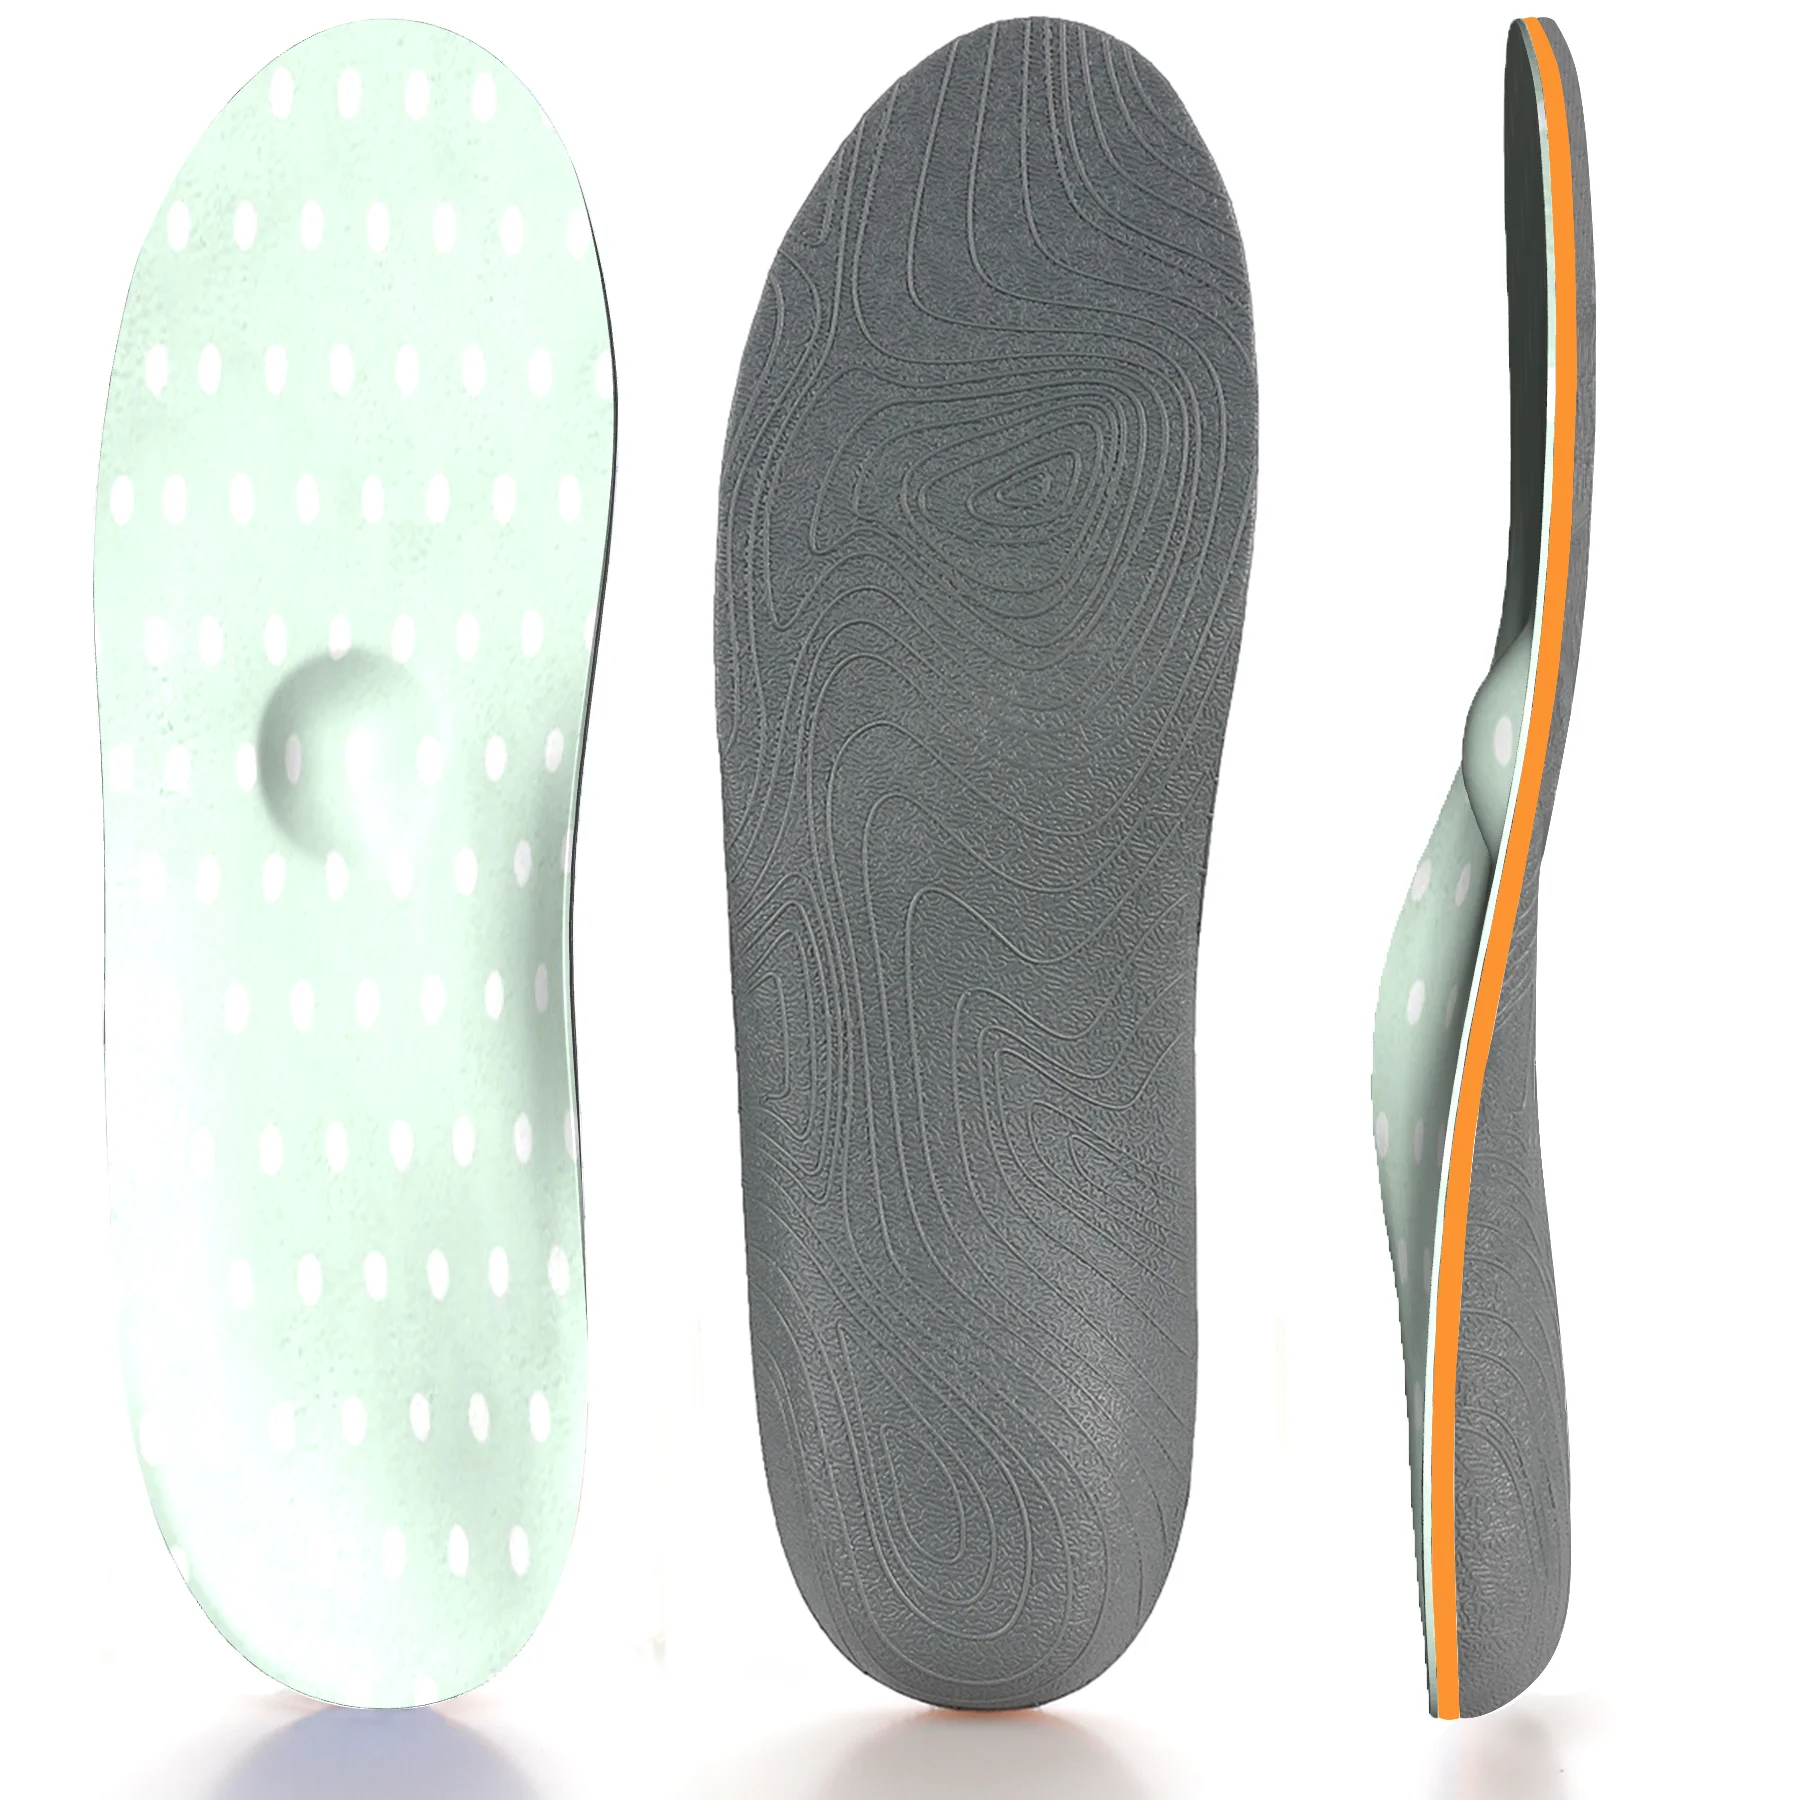 

Green Round High Arch Support Insole Ease Plantillas Fascitis Plantar Foot Pain Orthopedic Insoles for Men and Women Flat Feet